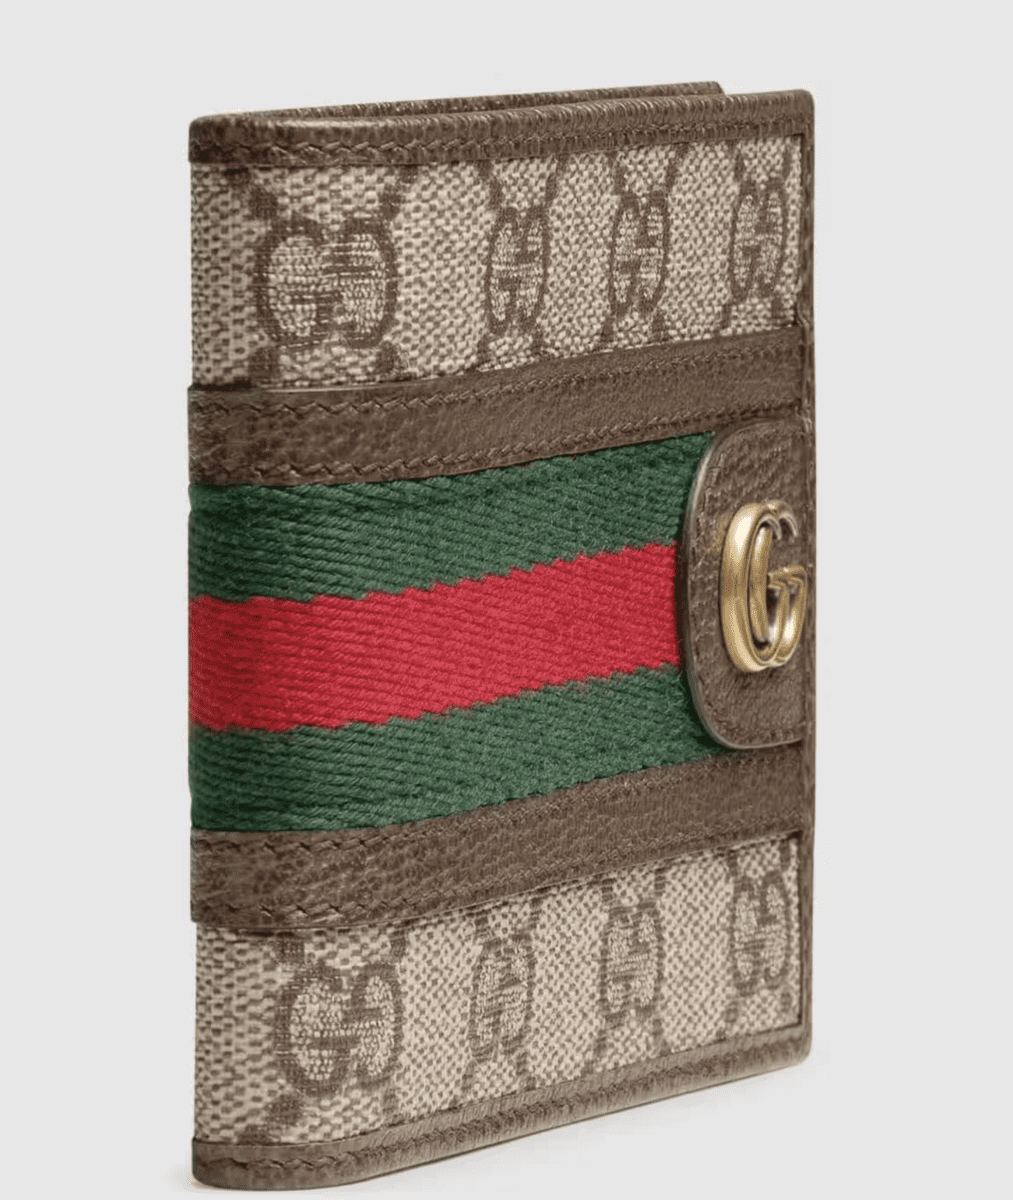 Gucci Ophidia GG Supreme Wallet - Side View